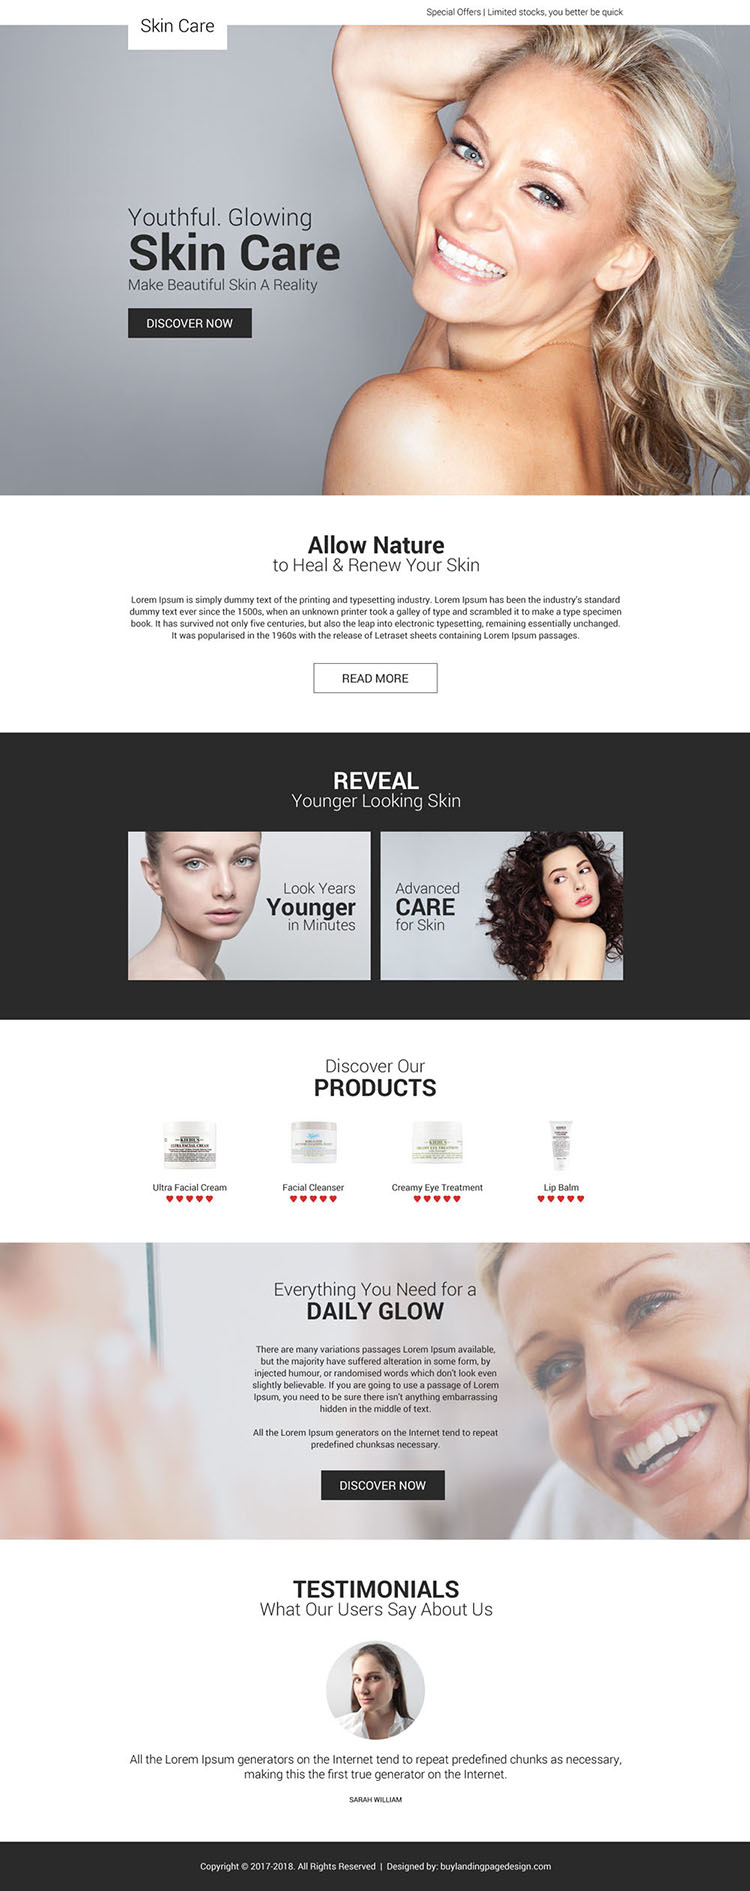 youthful and glowing skin care appealing landing page